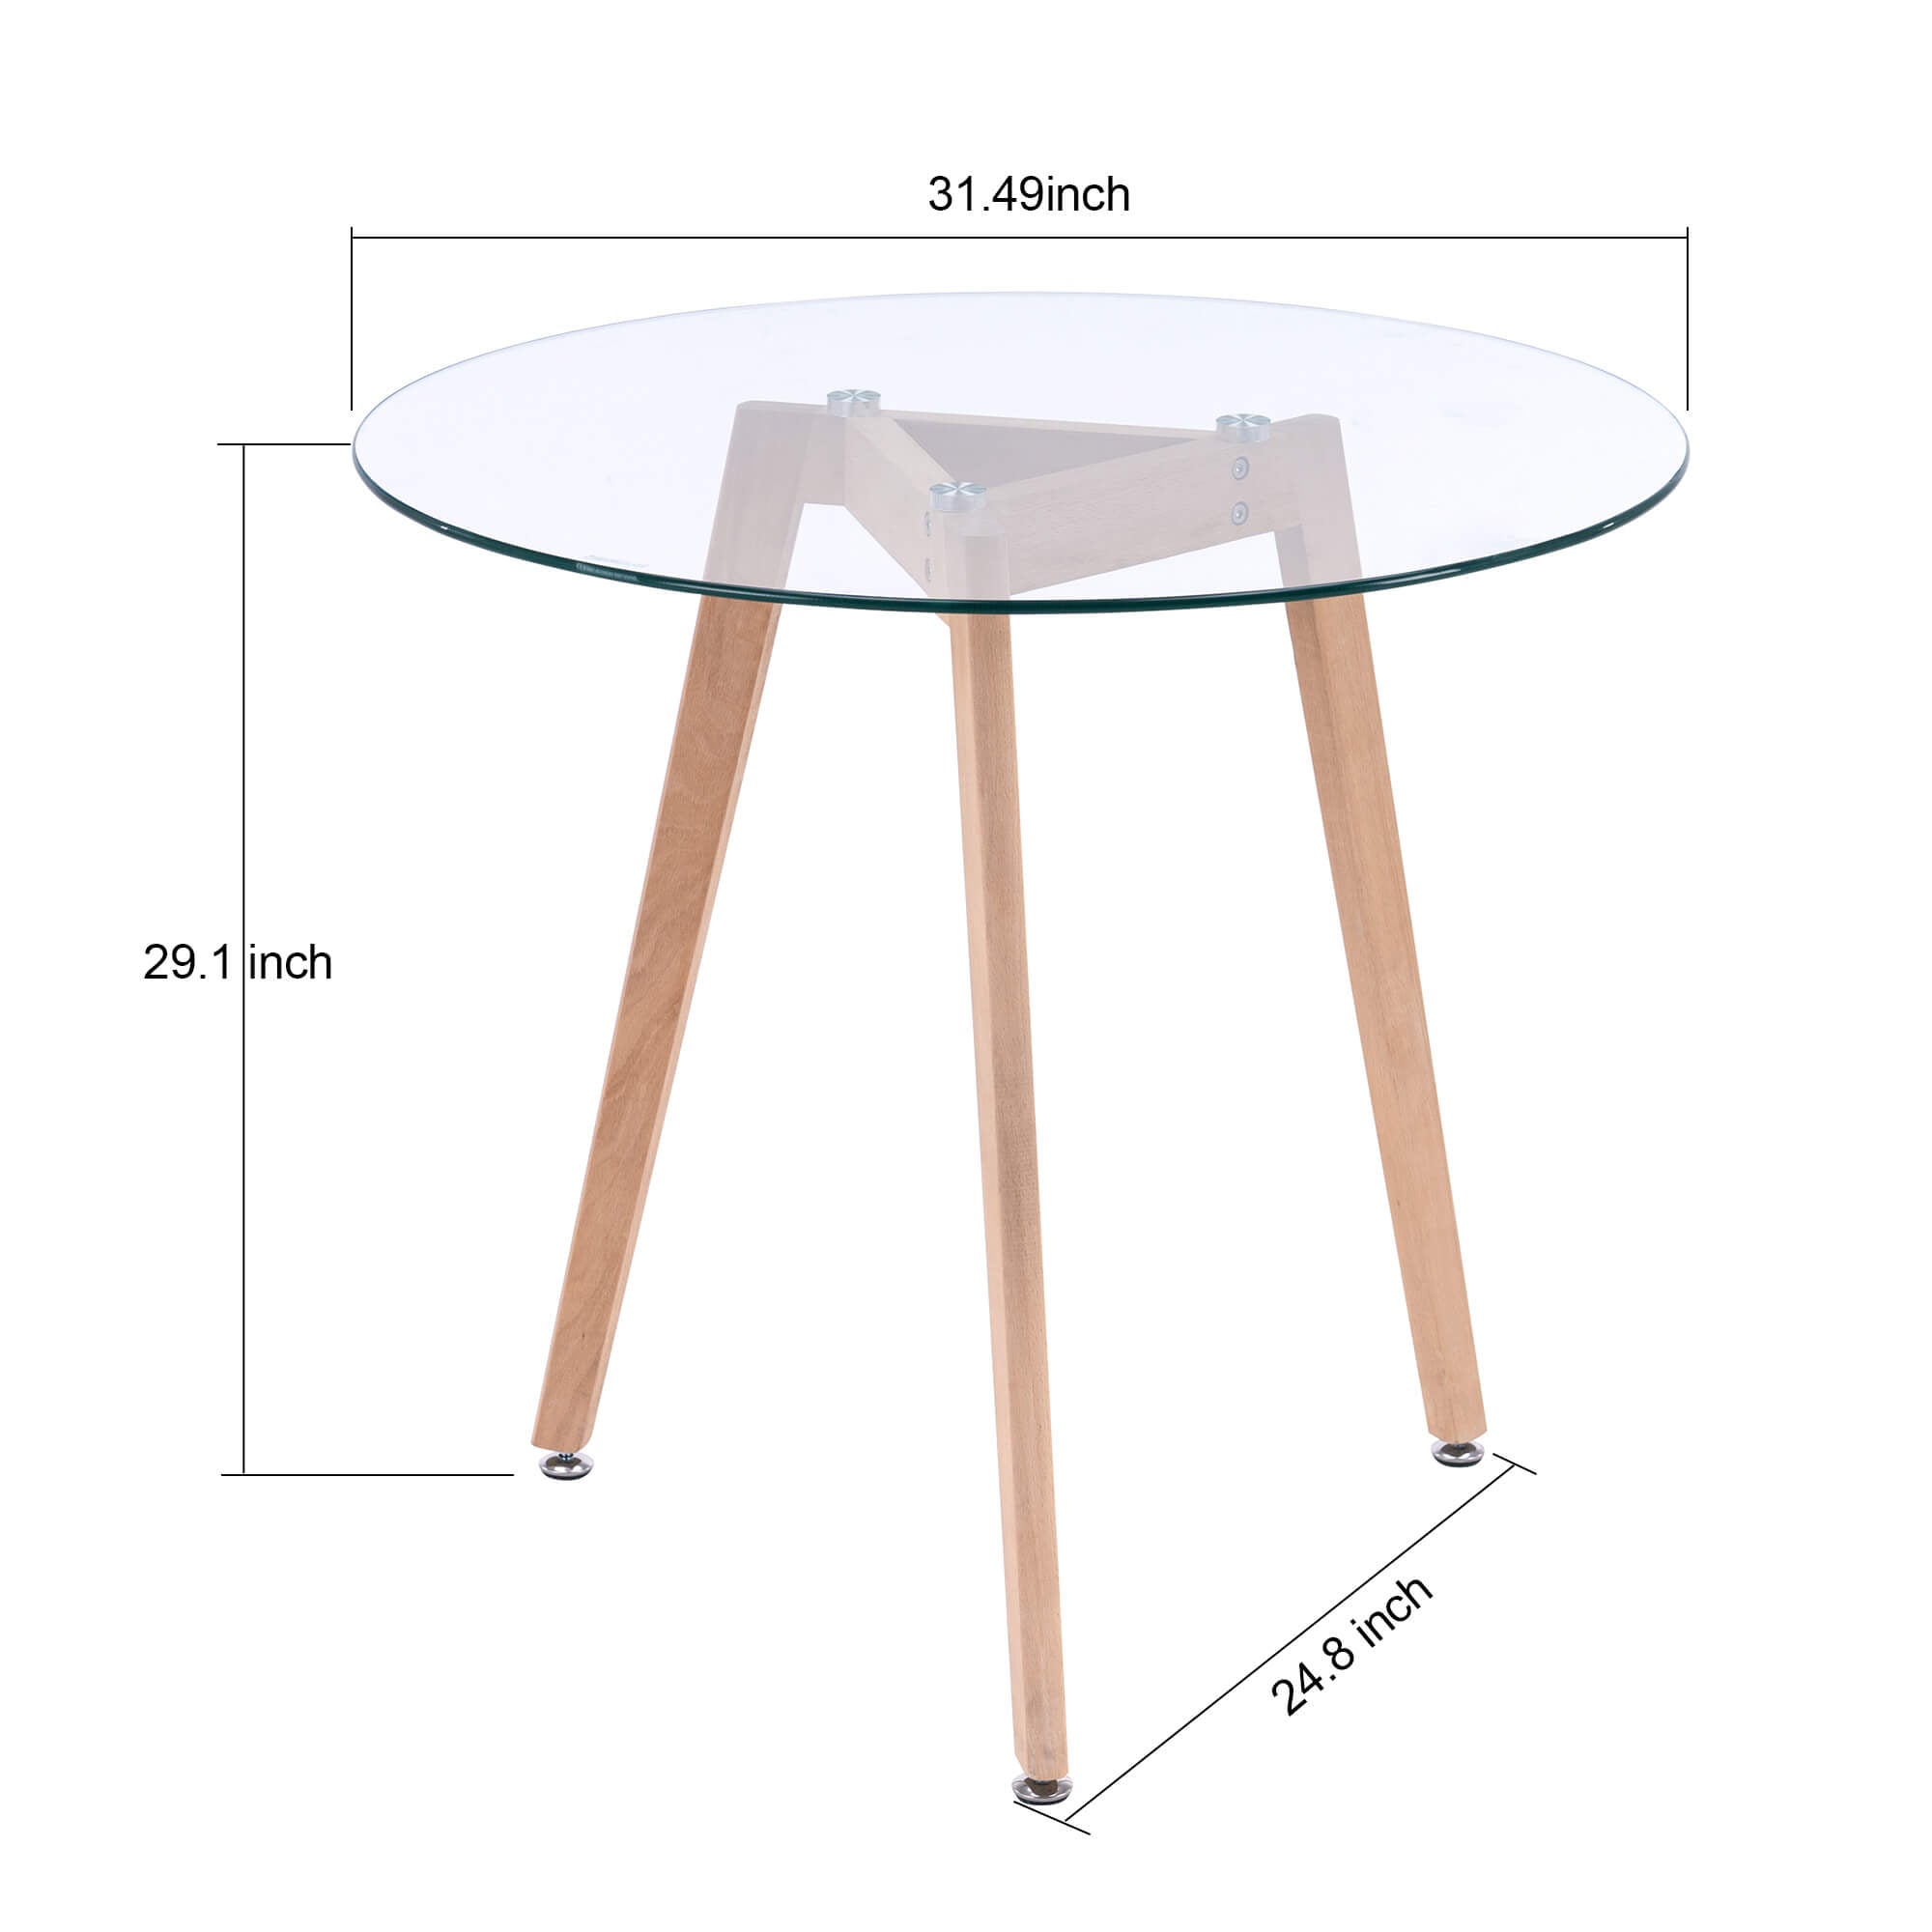 Ivinta Samll Outdoor Patio Dining Set, Small Round Glass Dining Table with 2 Chairs